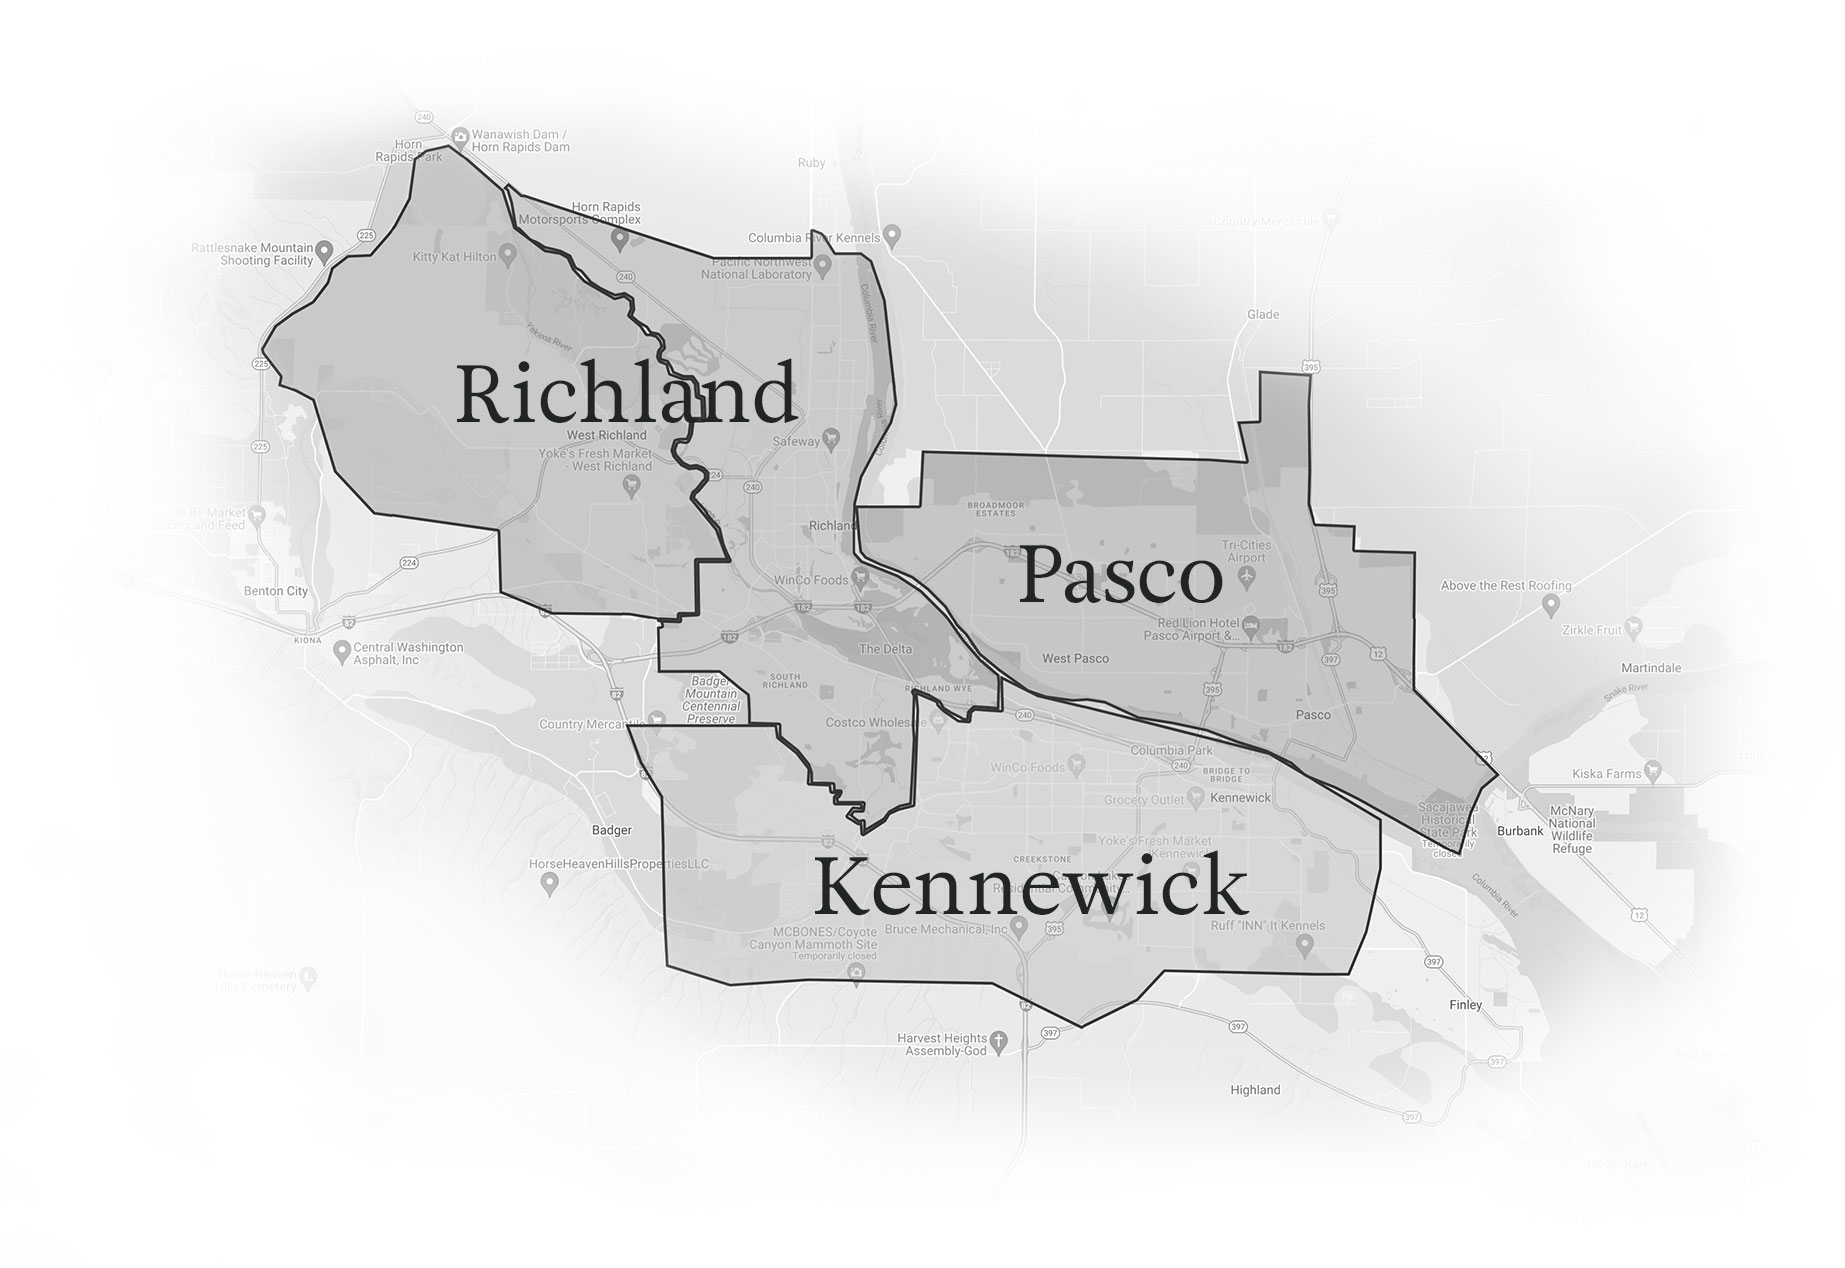 brett lott homes services the tri-cities area - map of richland, pasco, and kennewick